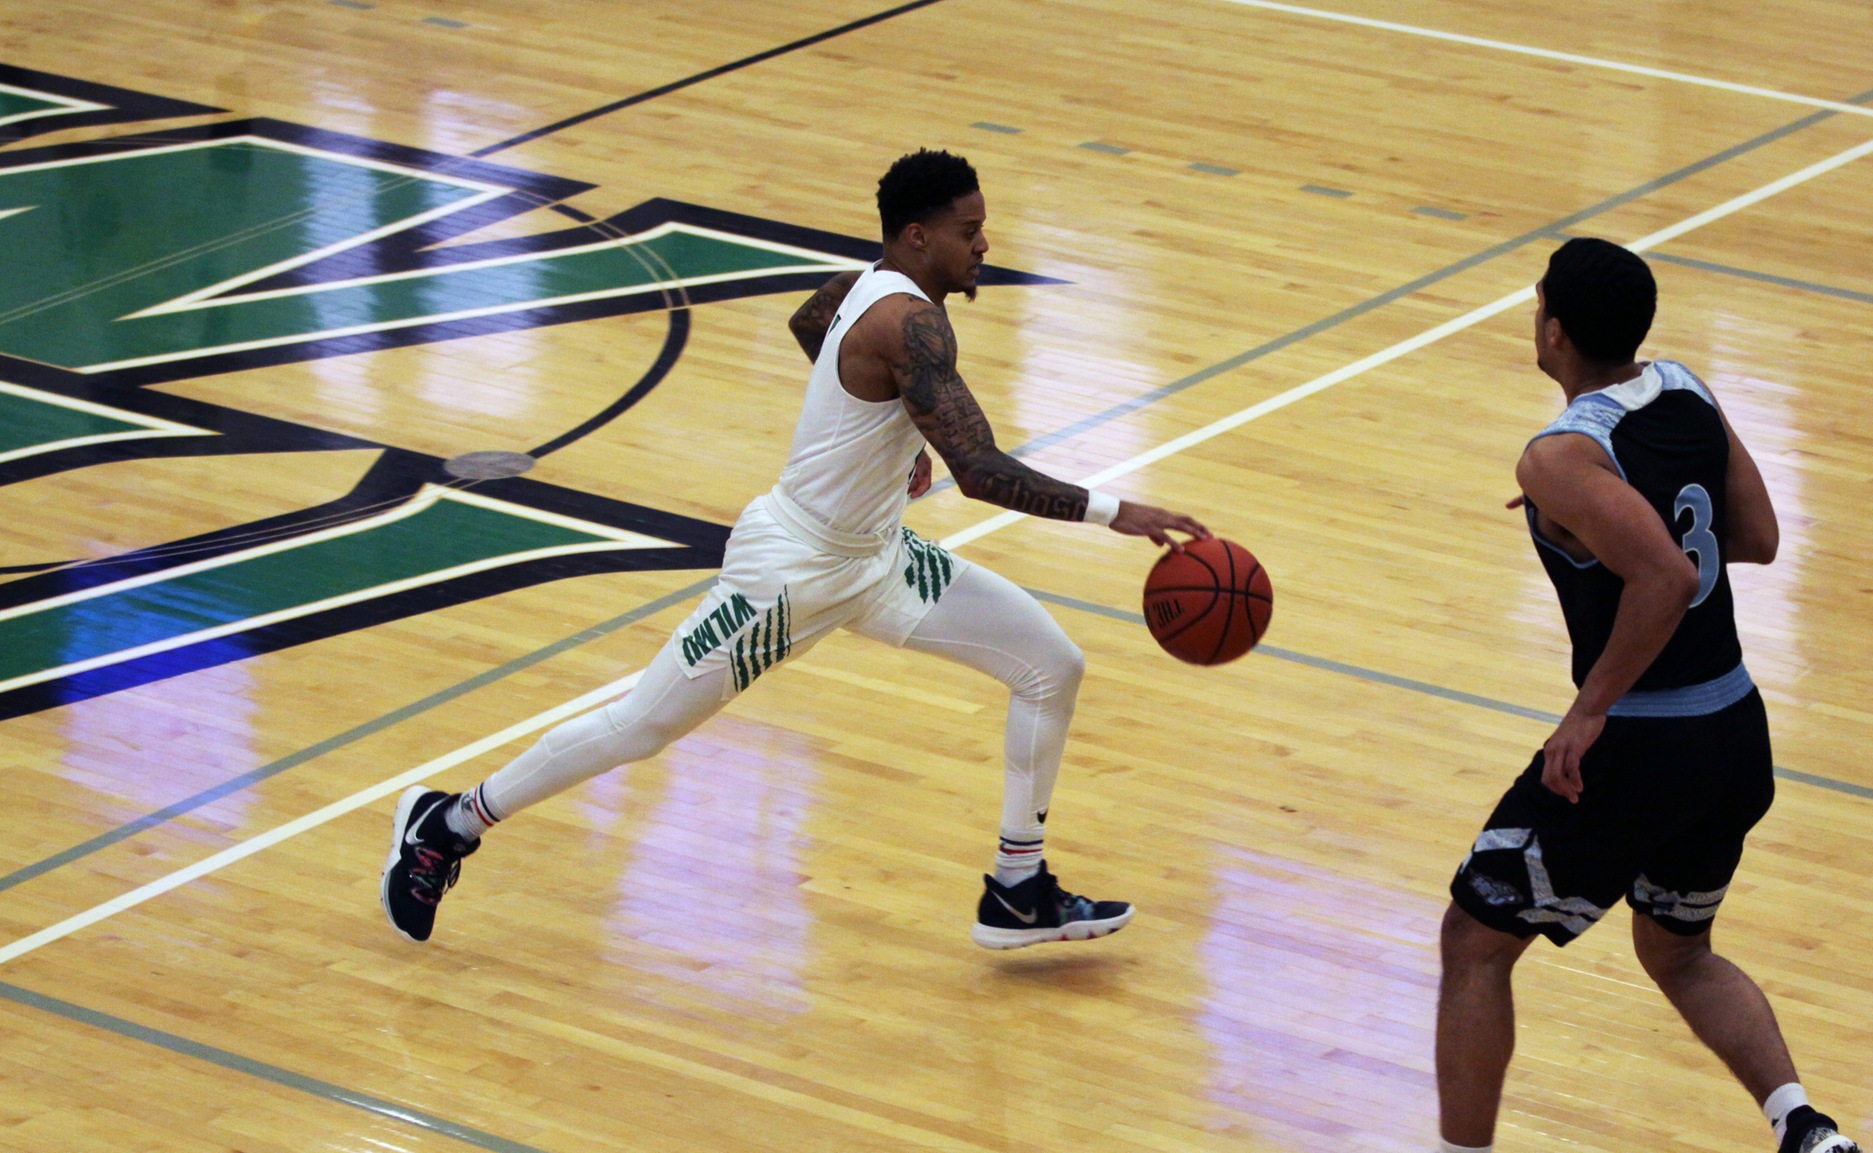 Copyright 2019; Wilmington University. All rights reserved. Photo by Mary Kate Rumbaugh. December 7, 2019 vs. Holy Family.